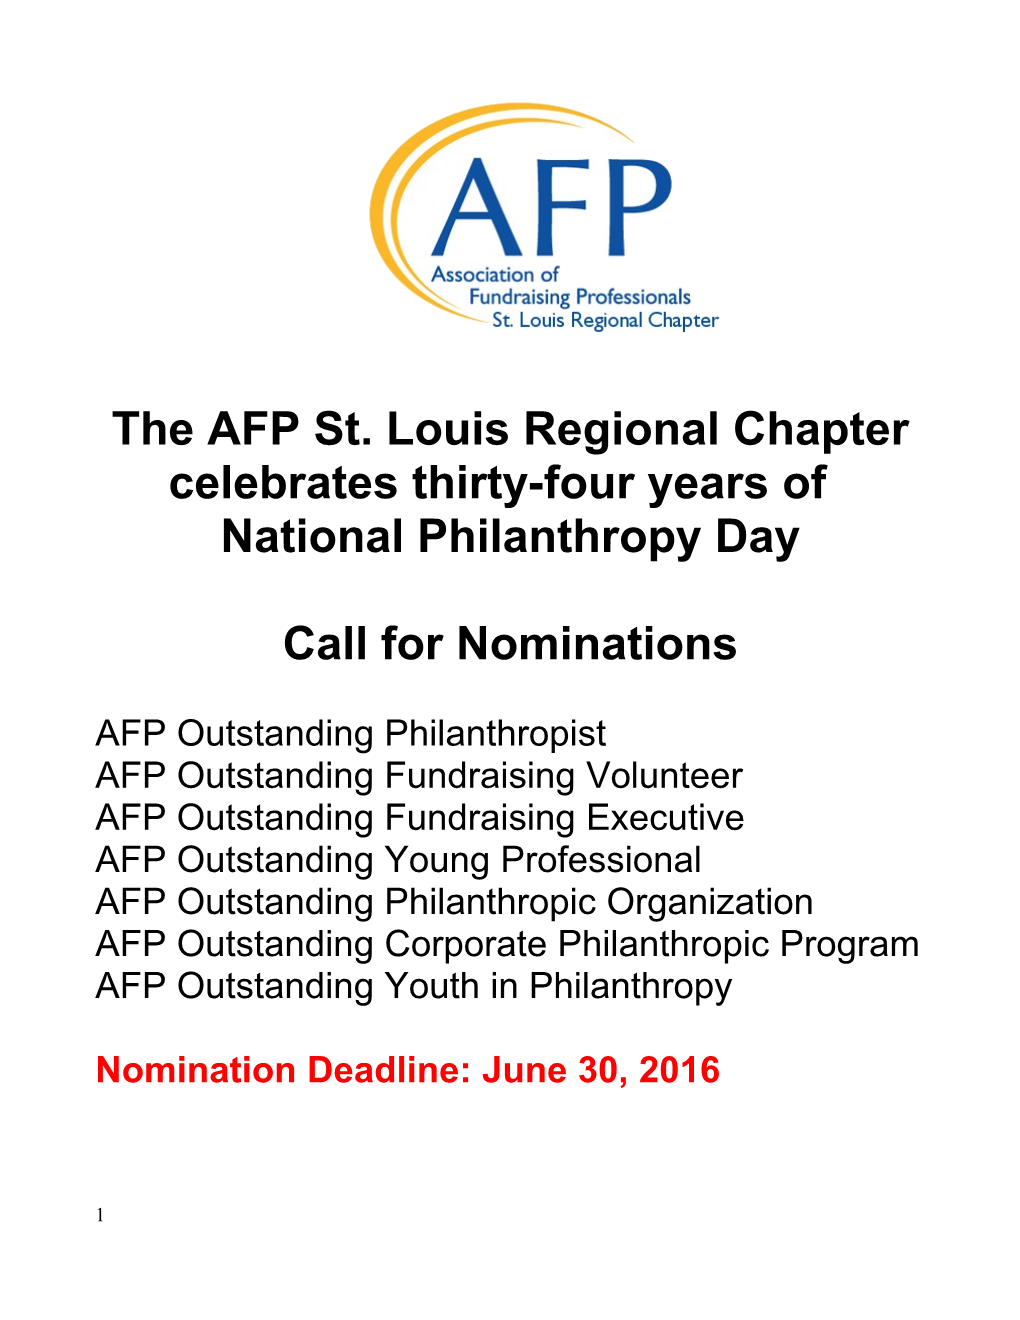 The AFP St. Louis Regional Chapter Celebrates Thirty-Four Years Of